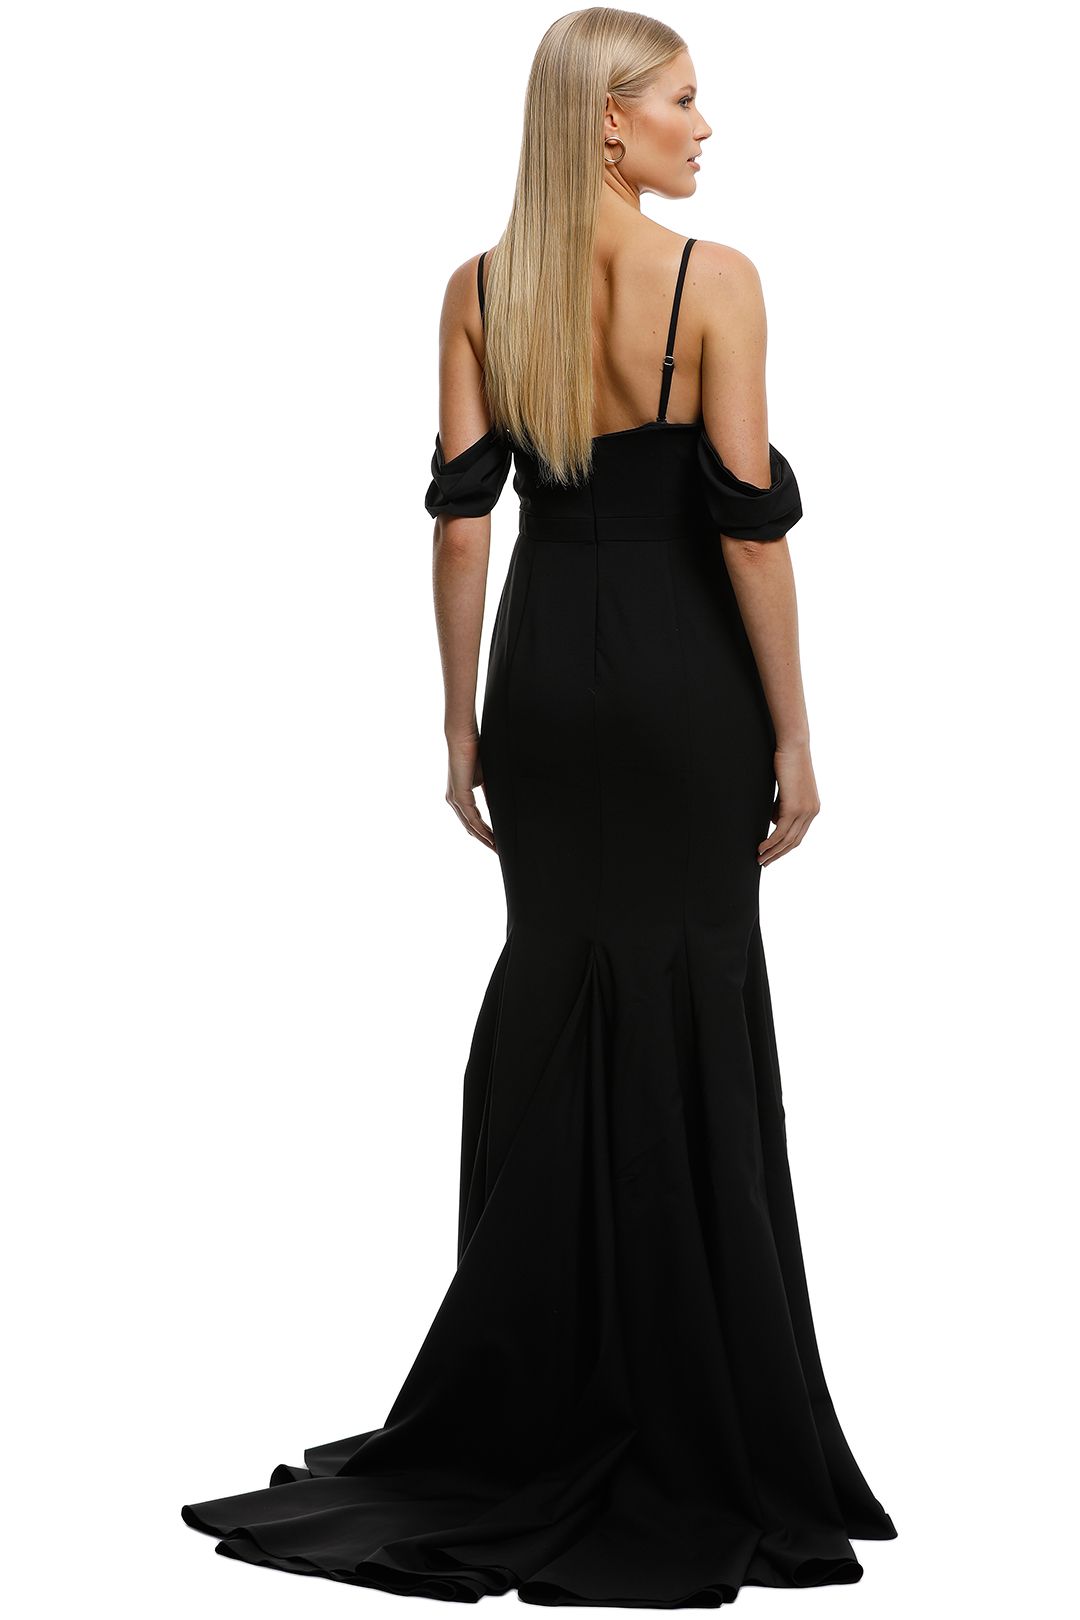 Amira Detachable Sleeve Gown in Black by Samantha Rose for Hire